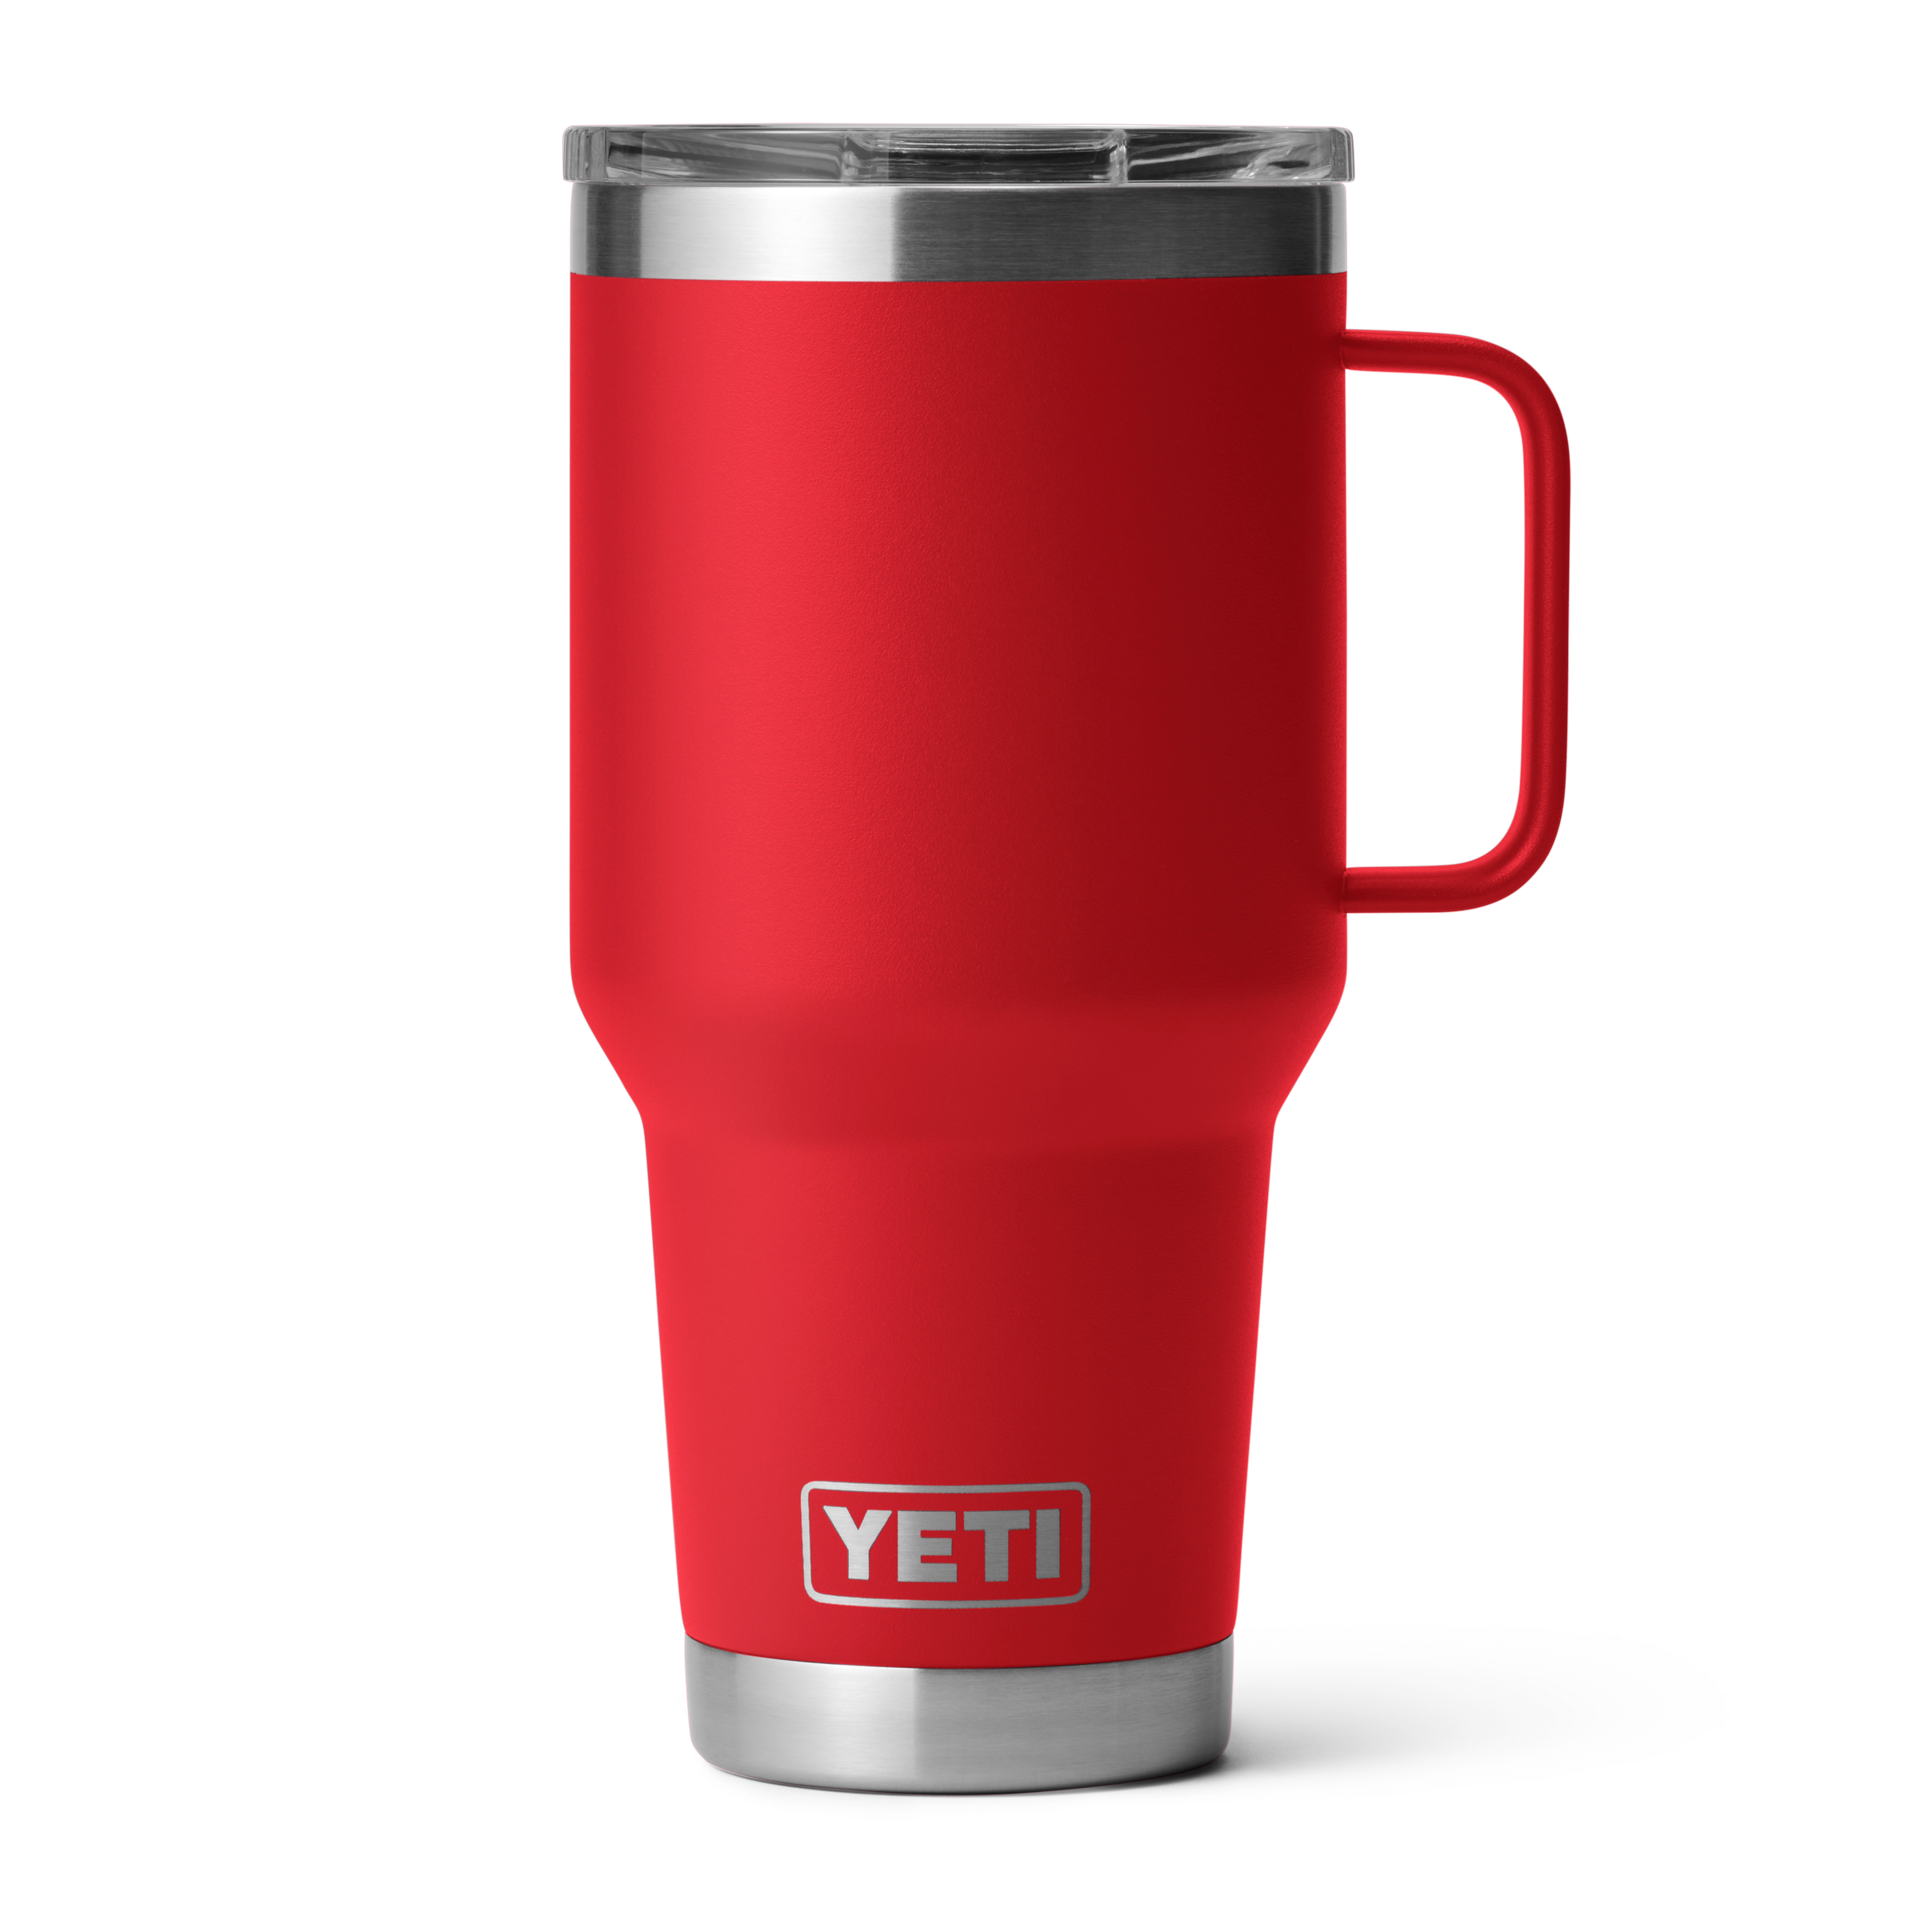 30 oz. / 887ml Travel Mug w/ Stronghold Lid - Rescue Red